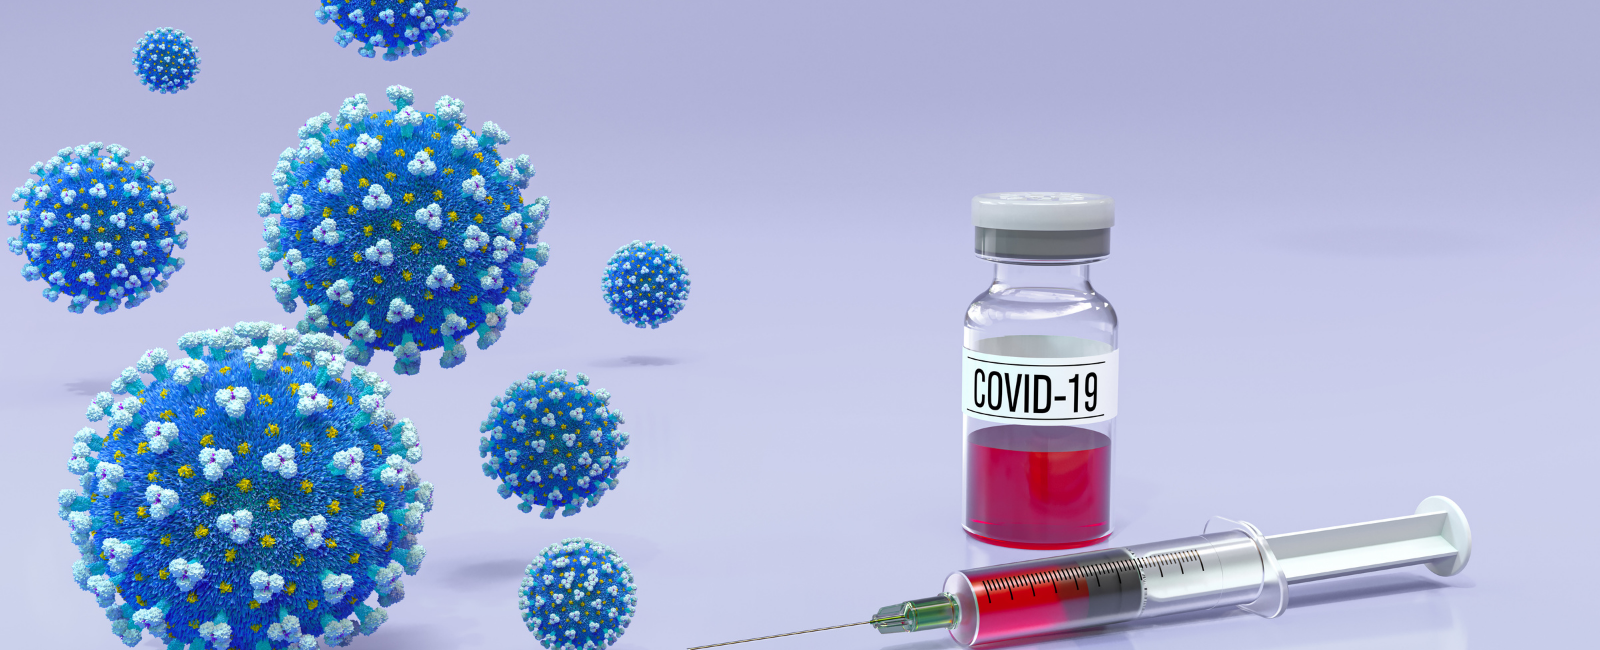 Blue background with COVID-19 balls, a syringe and vaccination bottle.